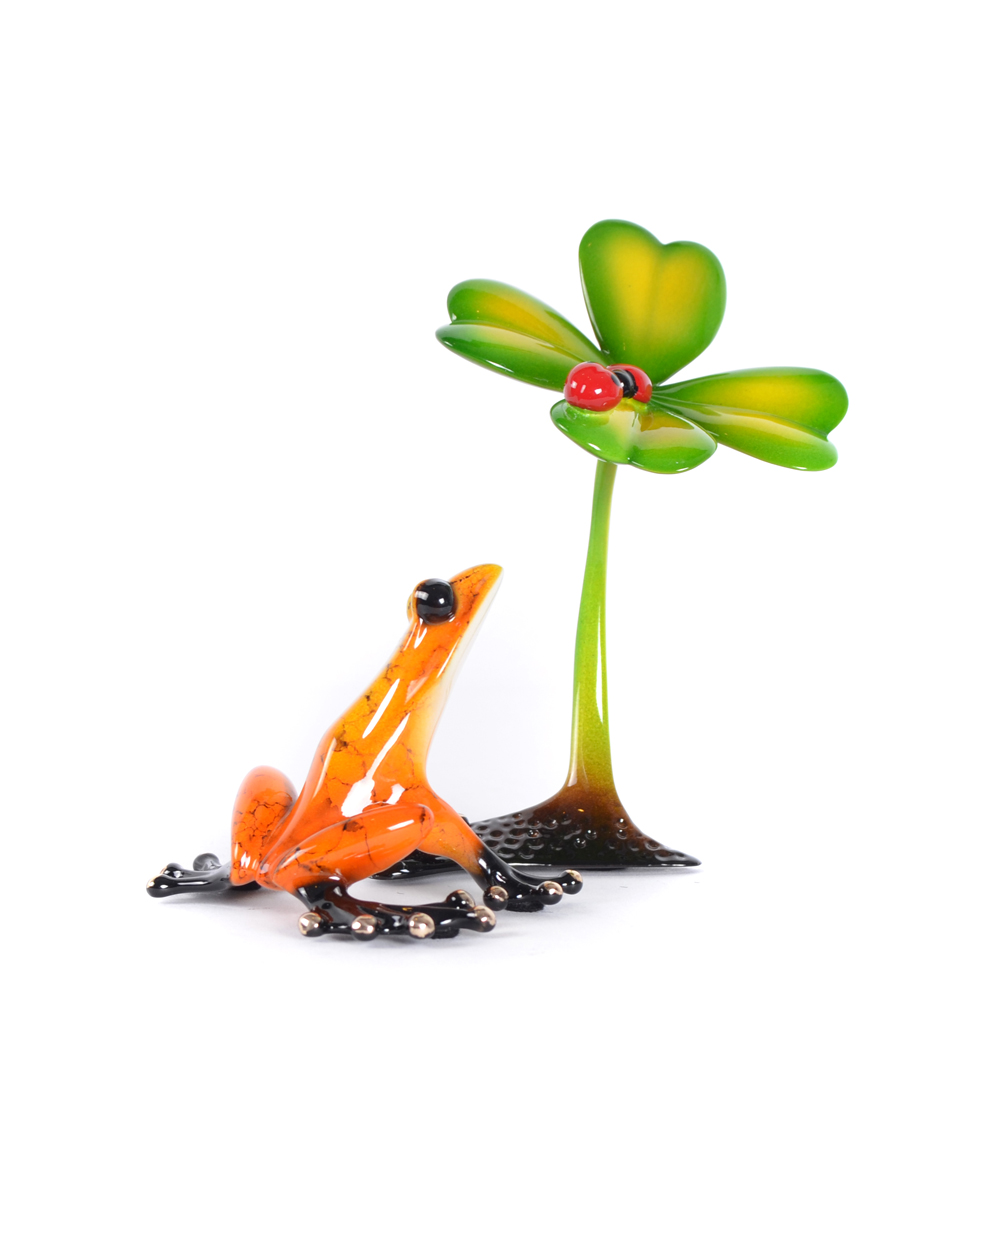 Signed, limited edition frog sculpture